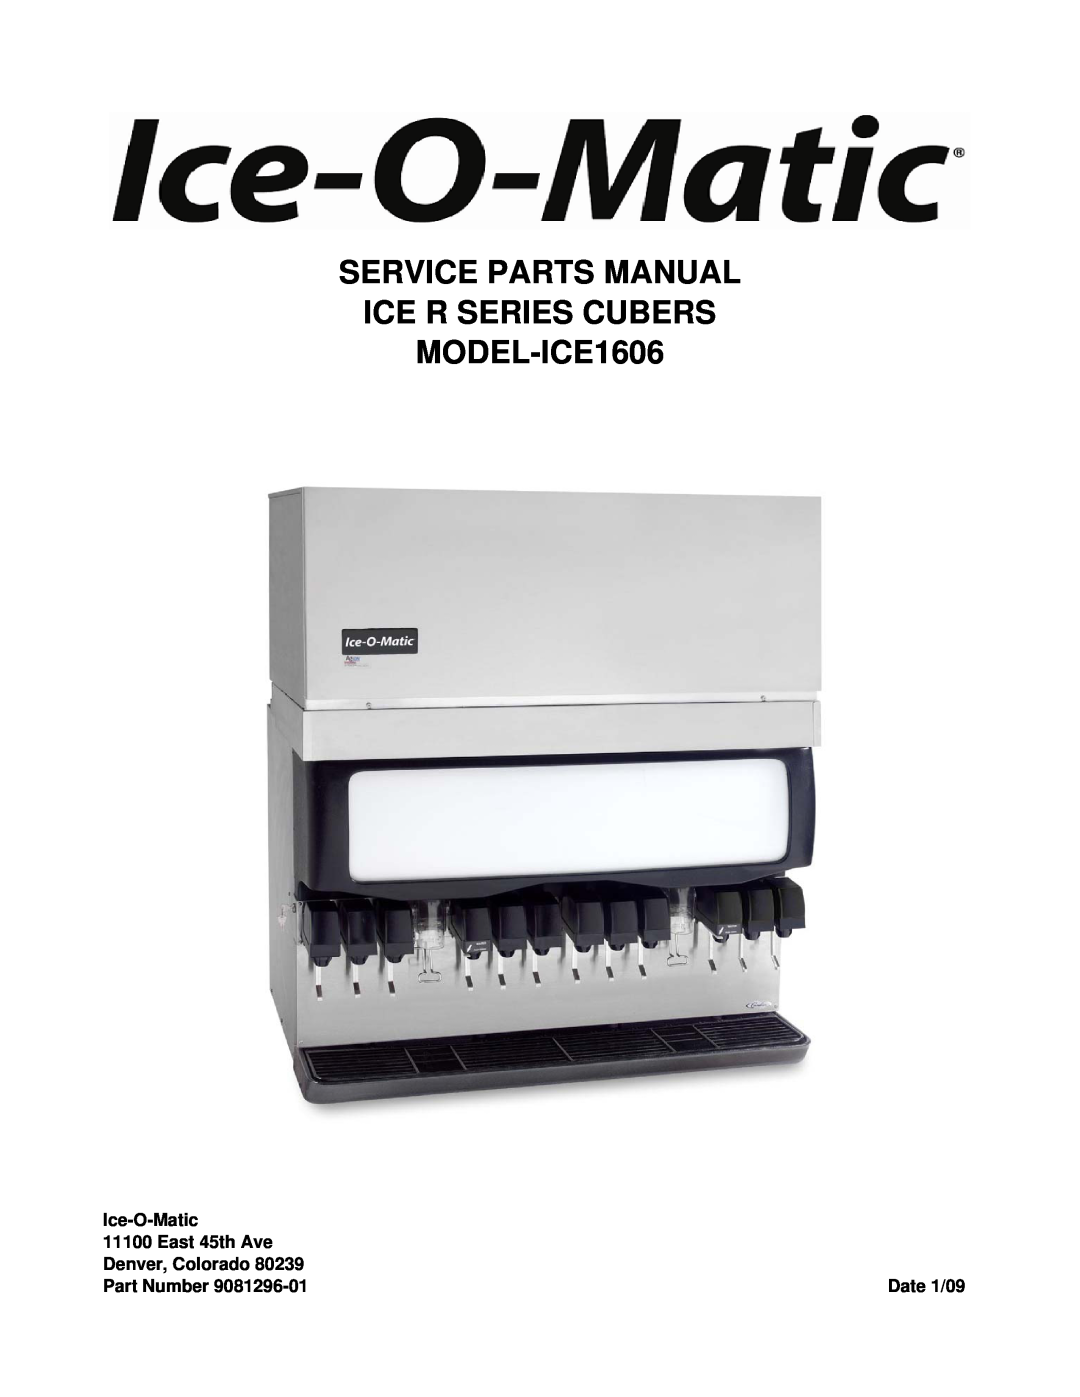 Ice-O-Matic manual Service Parts Manual Ice R Series Cubers, MODEL-ICE1606, Ice-O-Matic, East 45th Ave, Part Number 